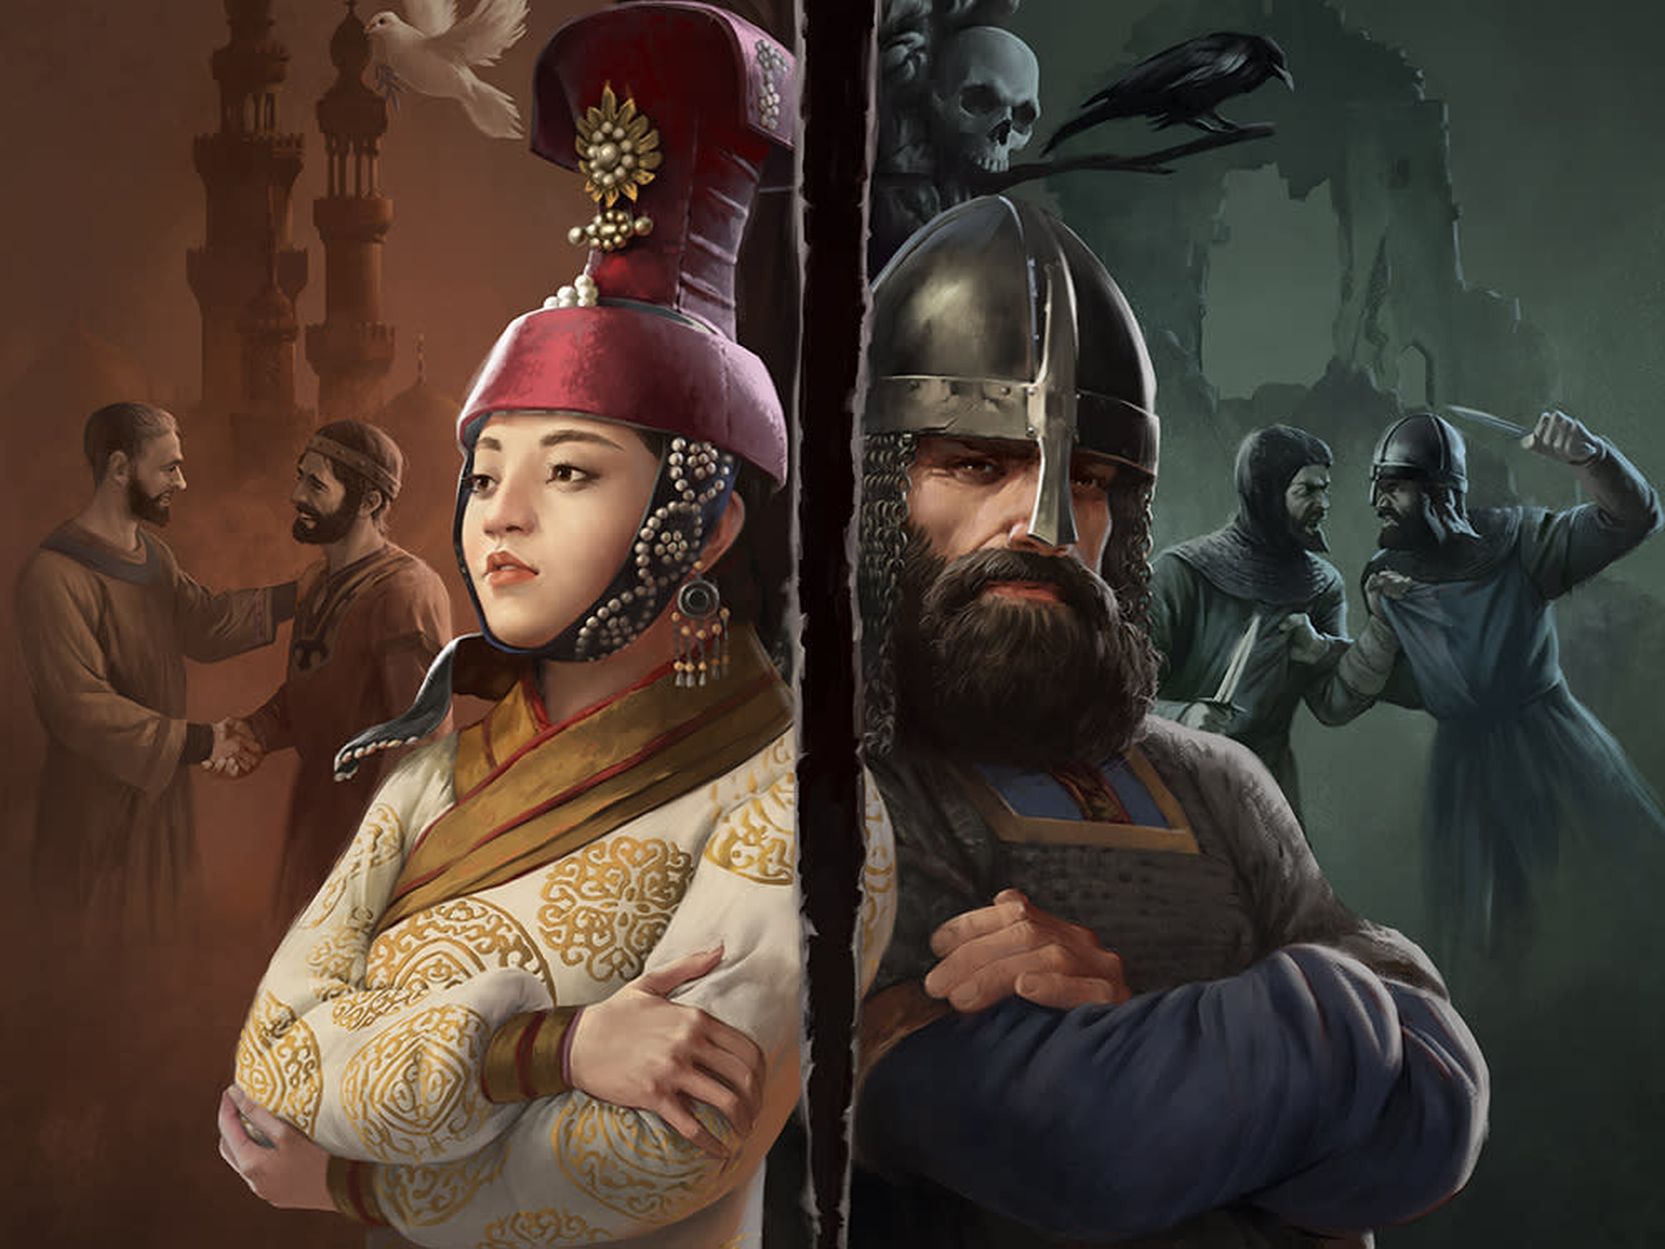 Image for Crusader Kings 3's Friends and Foes pack adds over 100 events related to your characters’ relationships